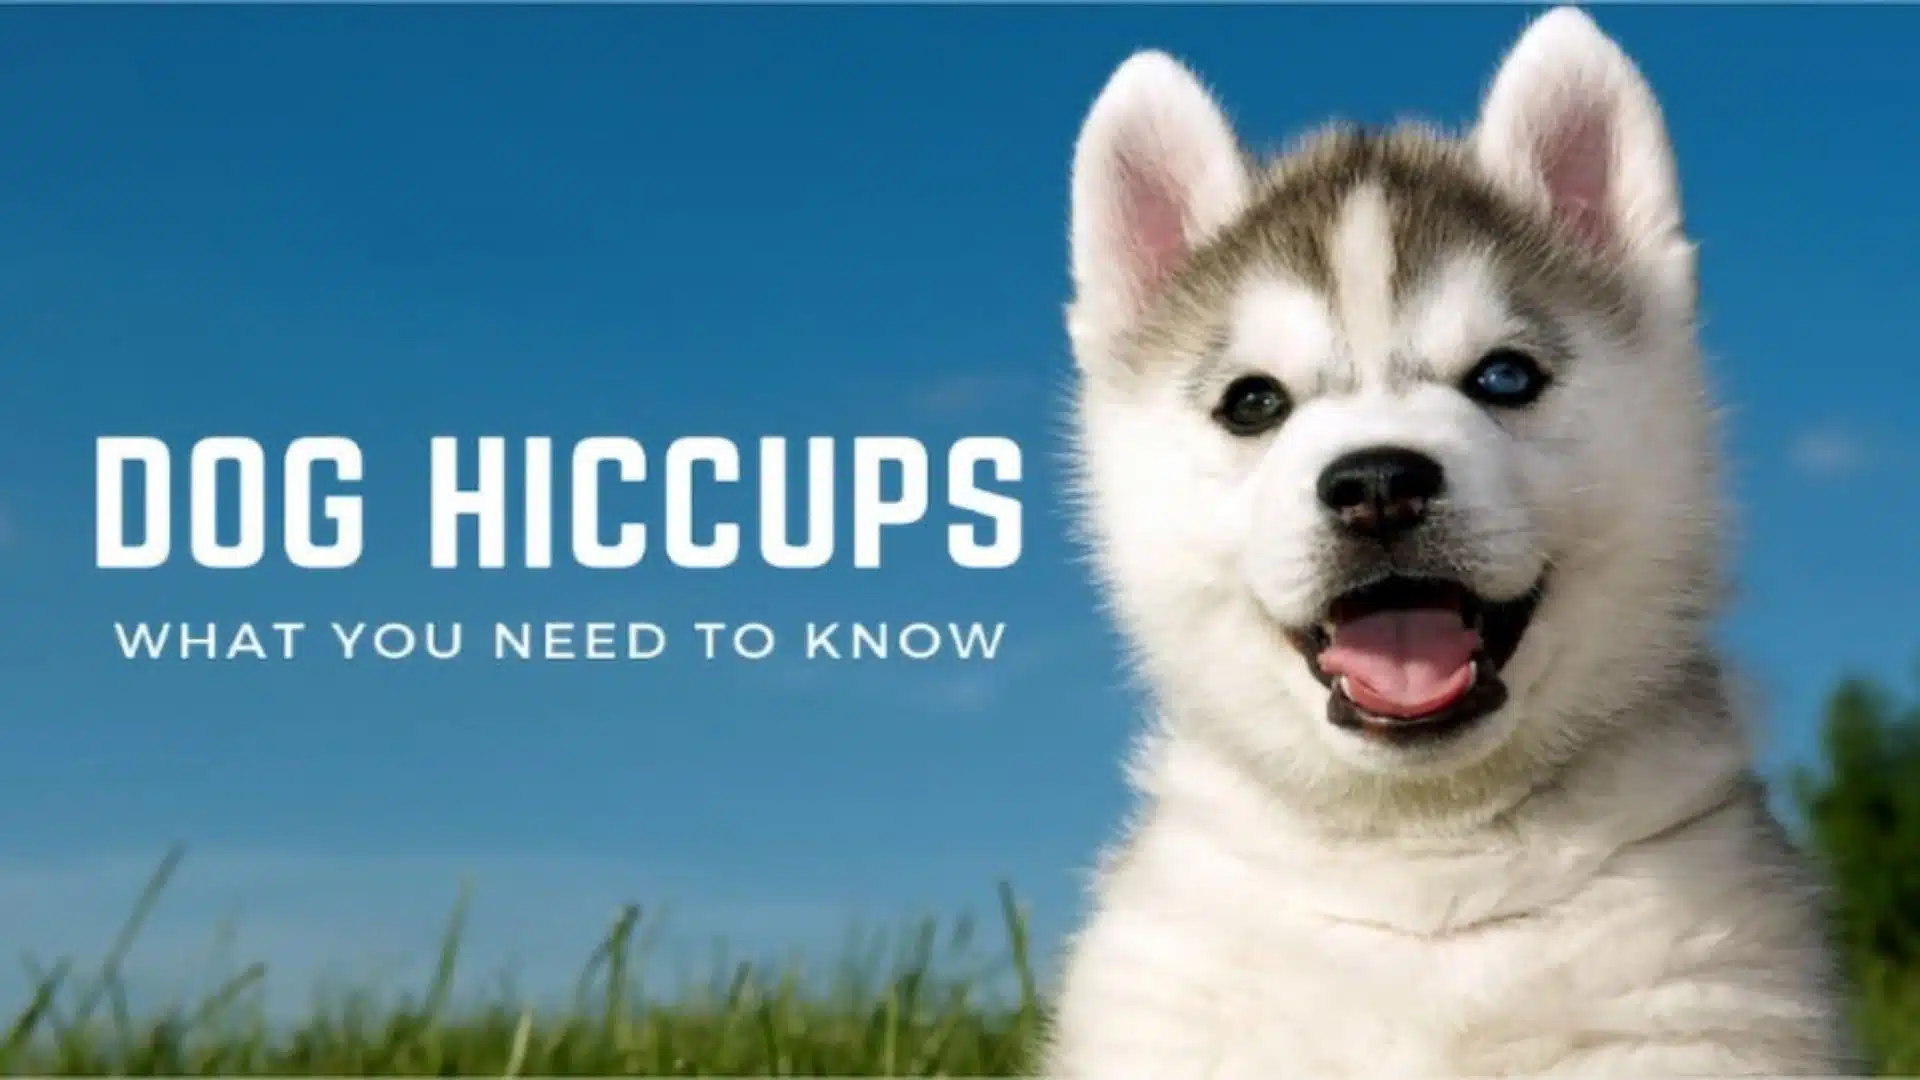 Dog Hiccups: What You Need to Know